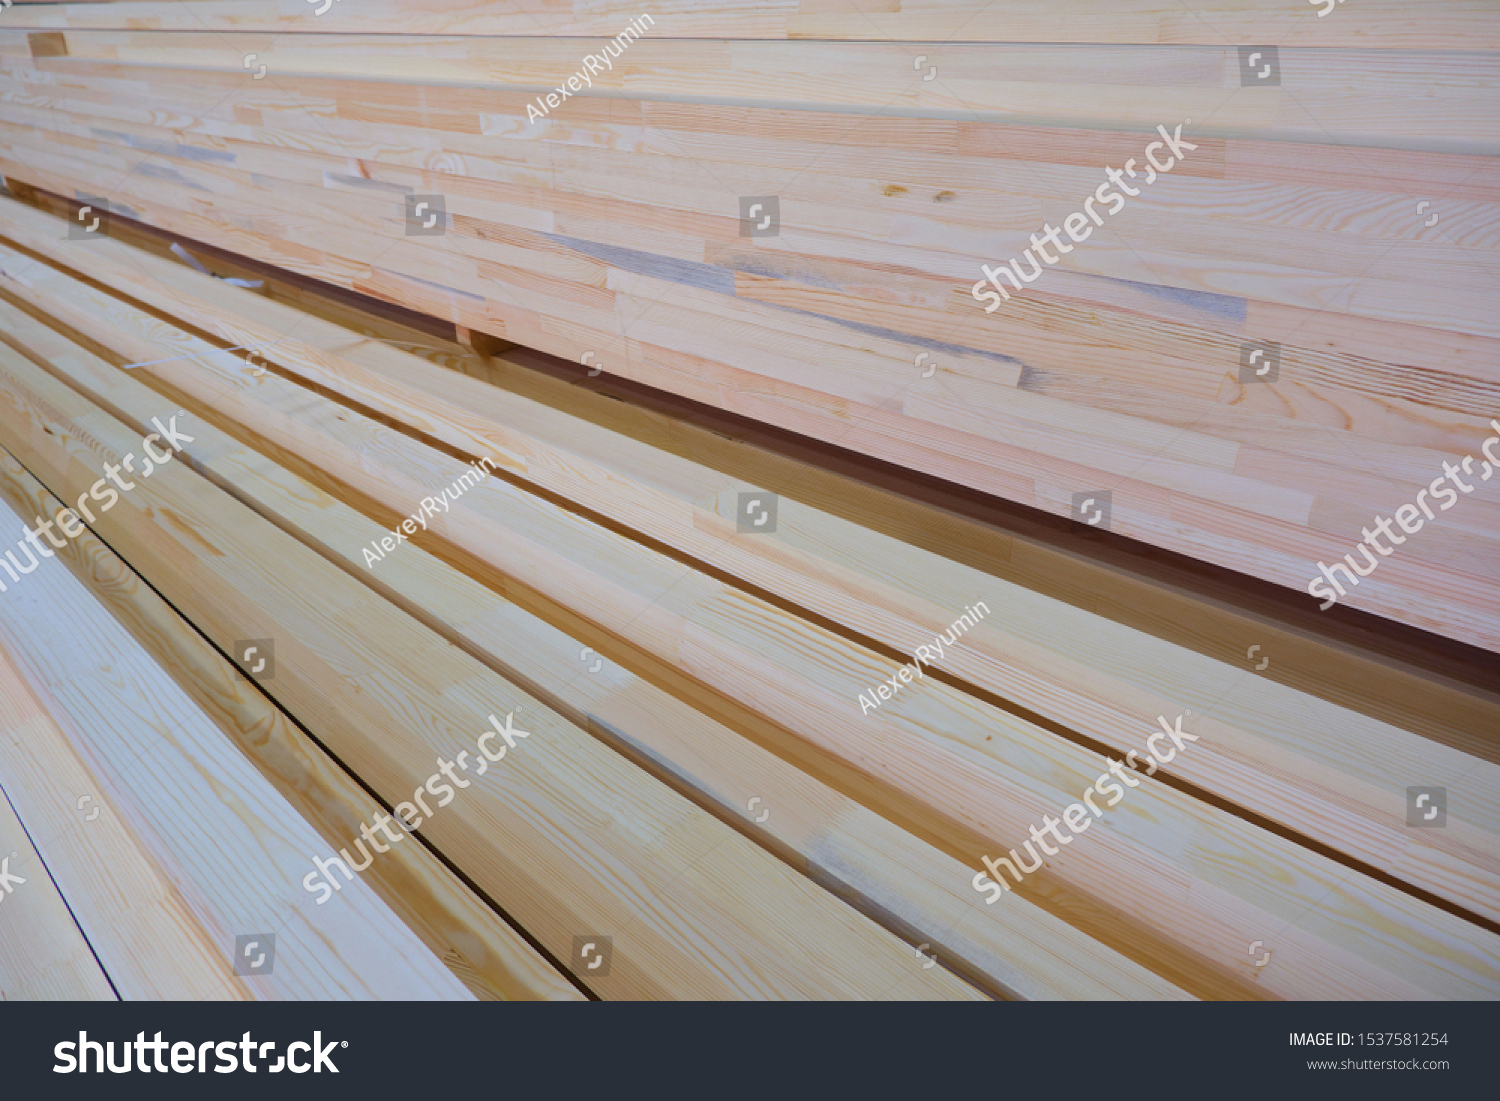 Side view of stack of two-layer wooden glued laminated timber beams from pine finger joint spliced boards for wooden windows